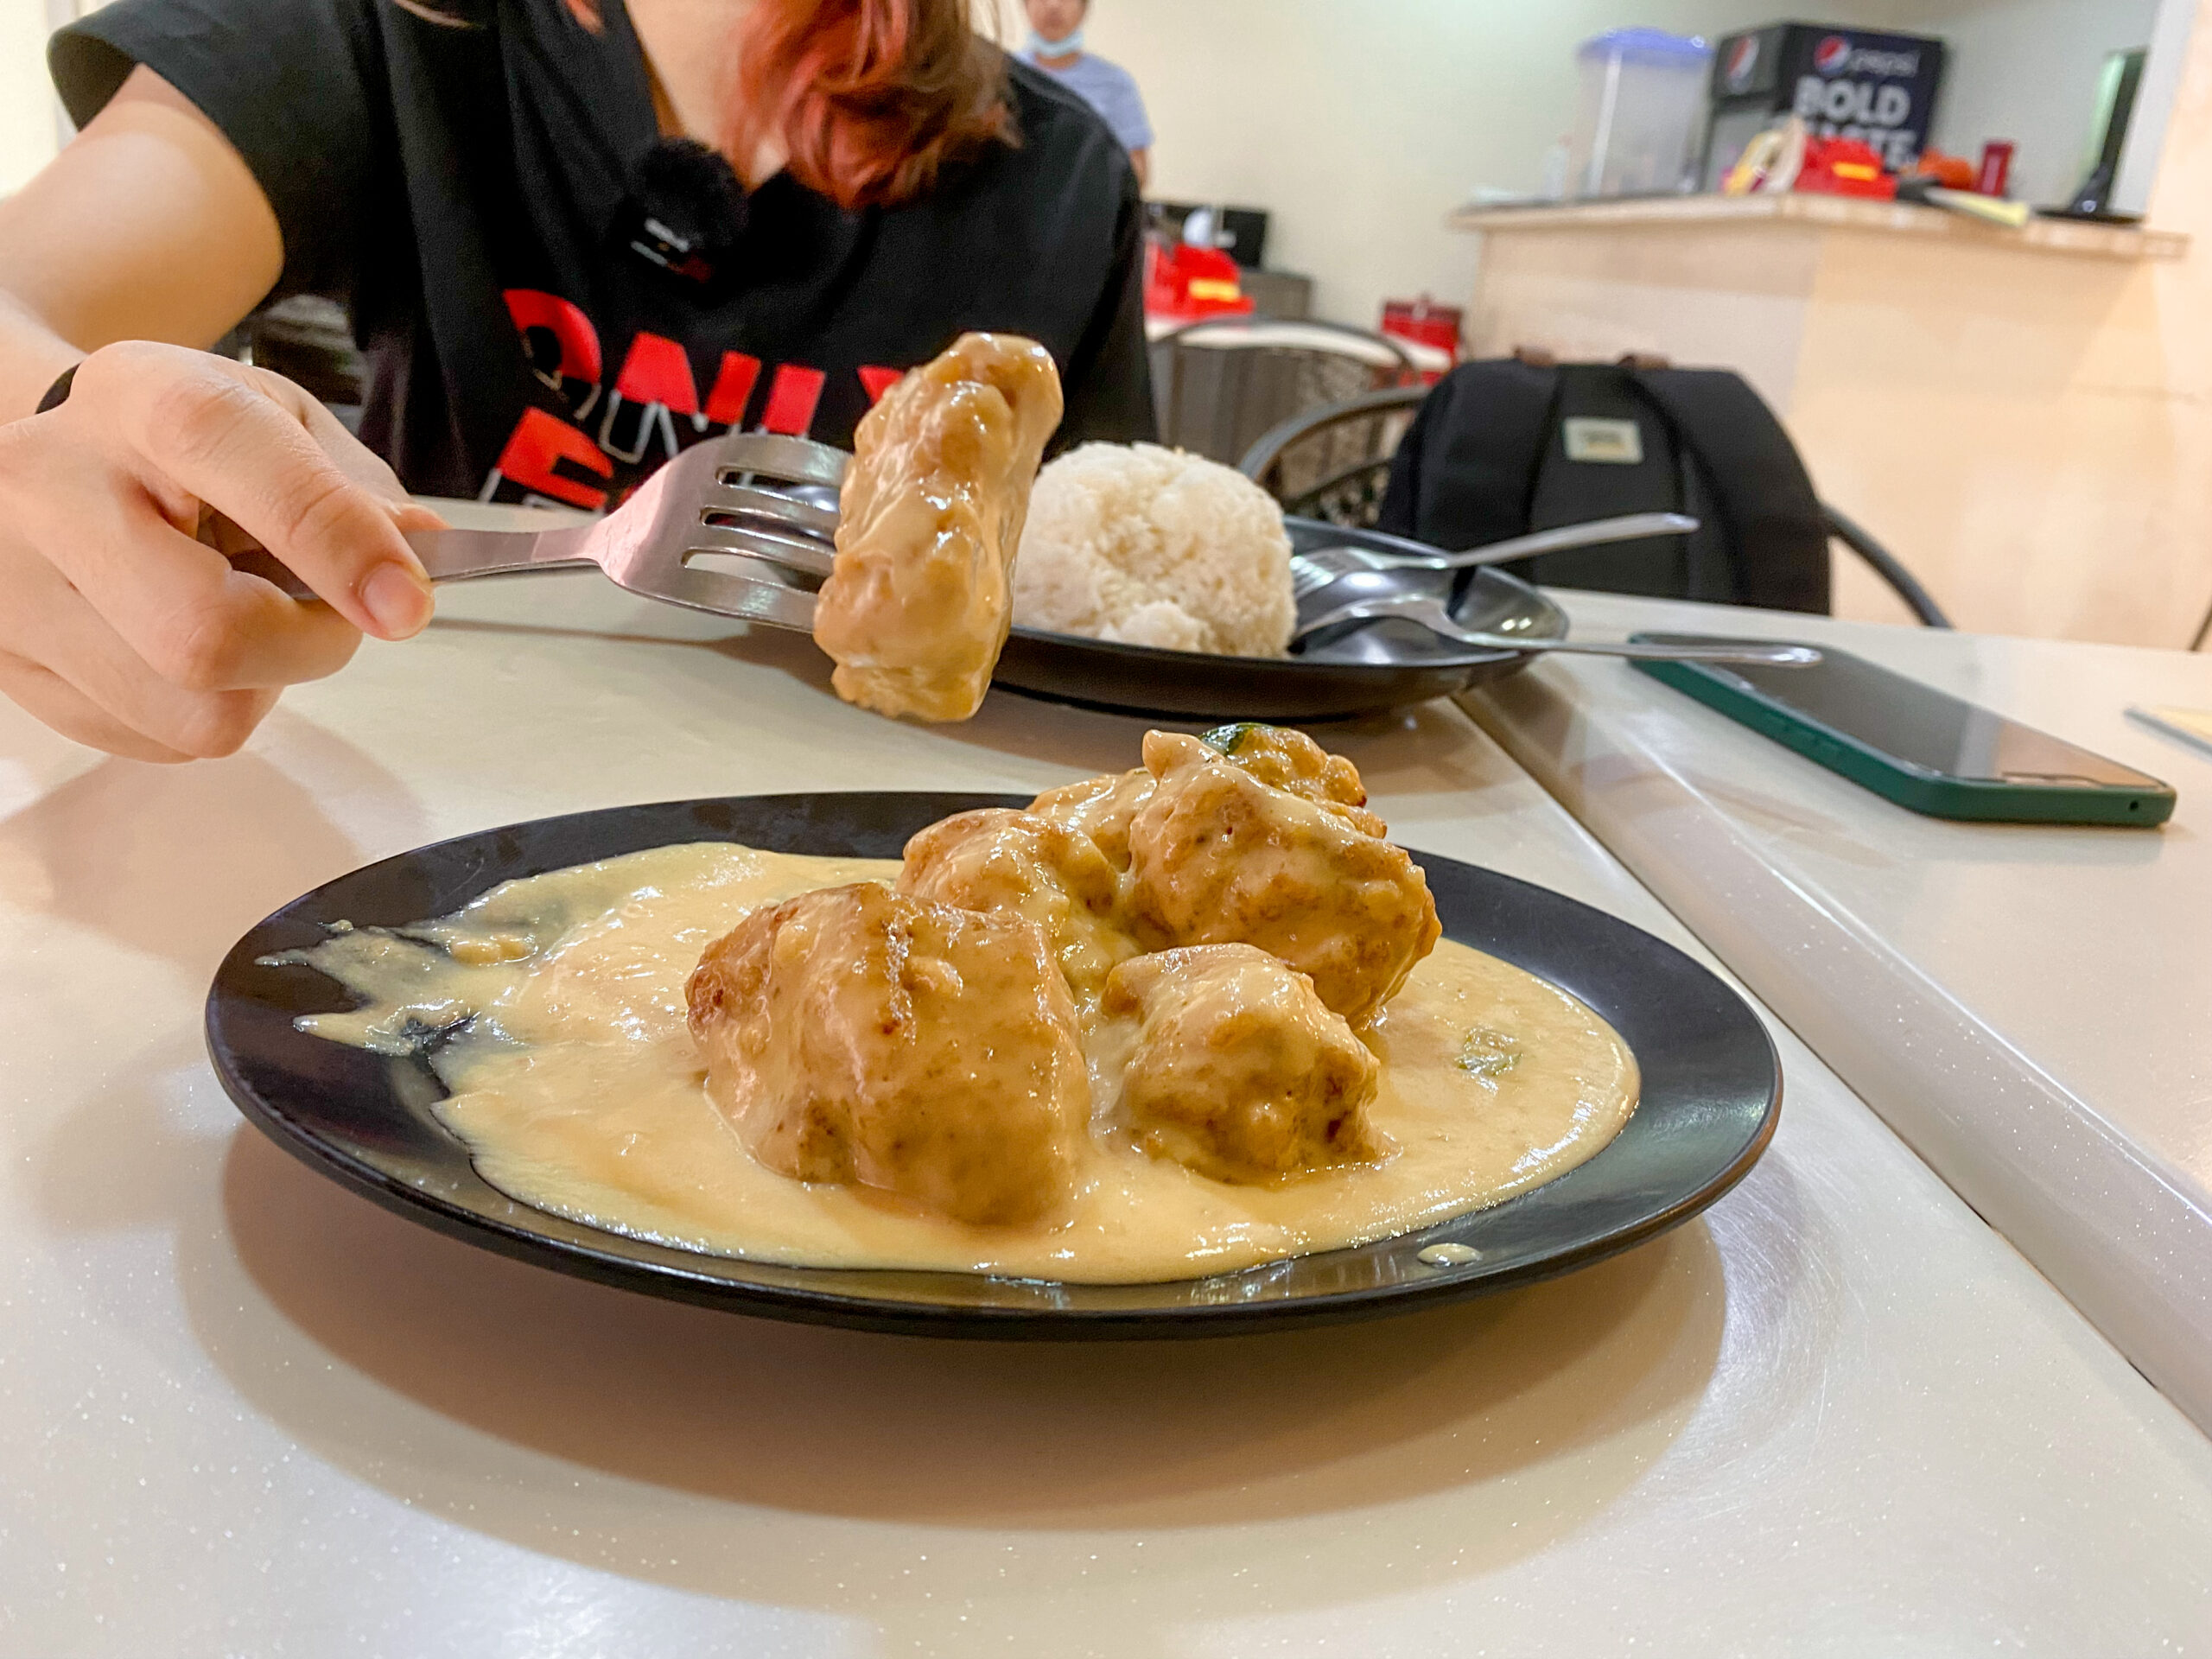 Gold Chili isn't the best Butter Chicken Spot anymore